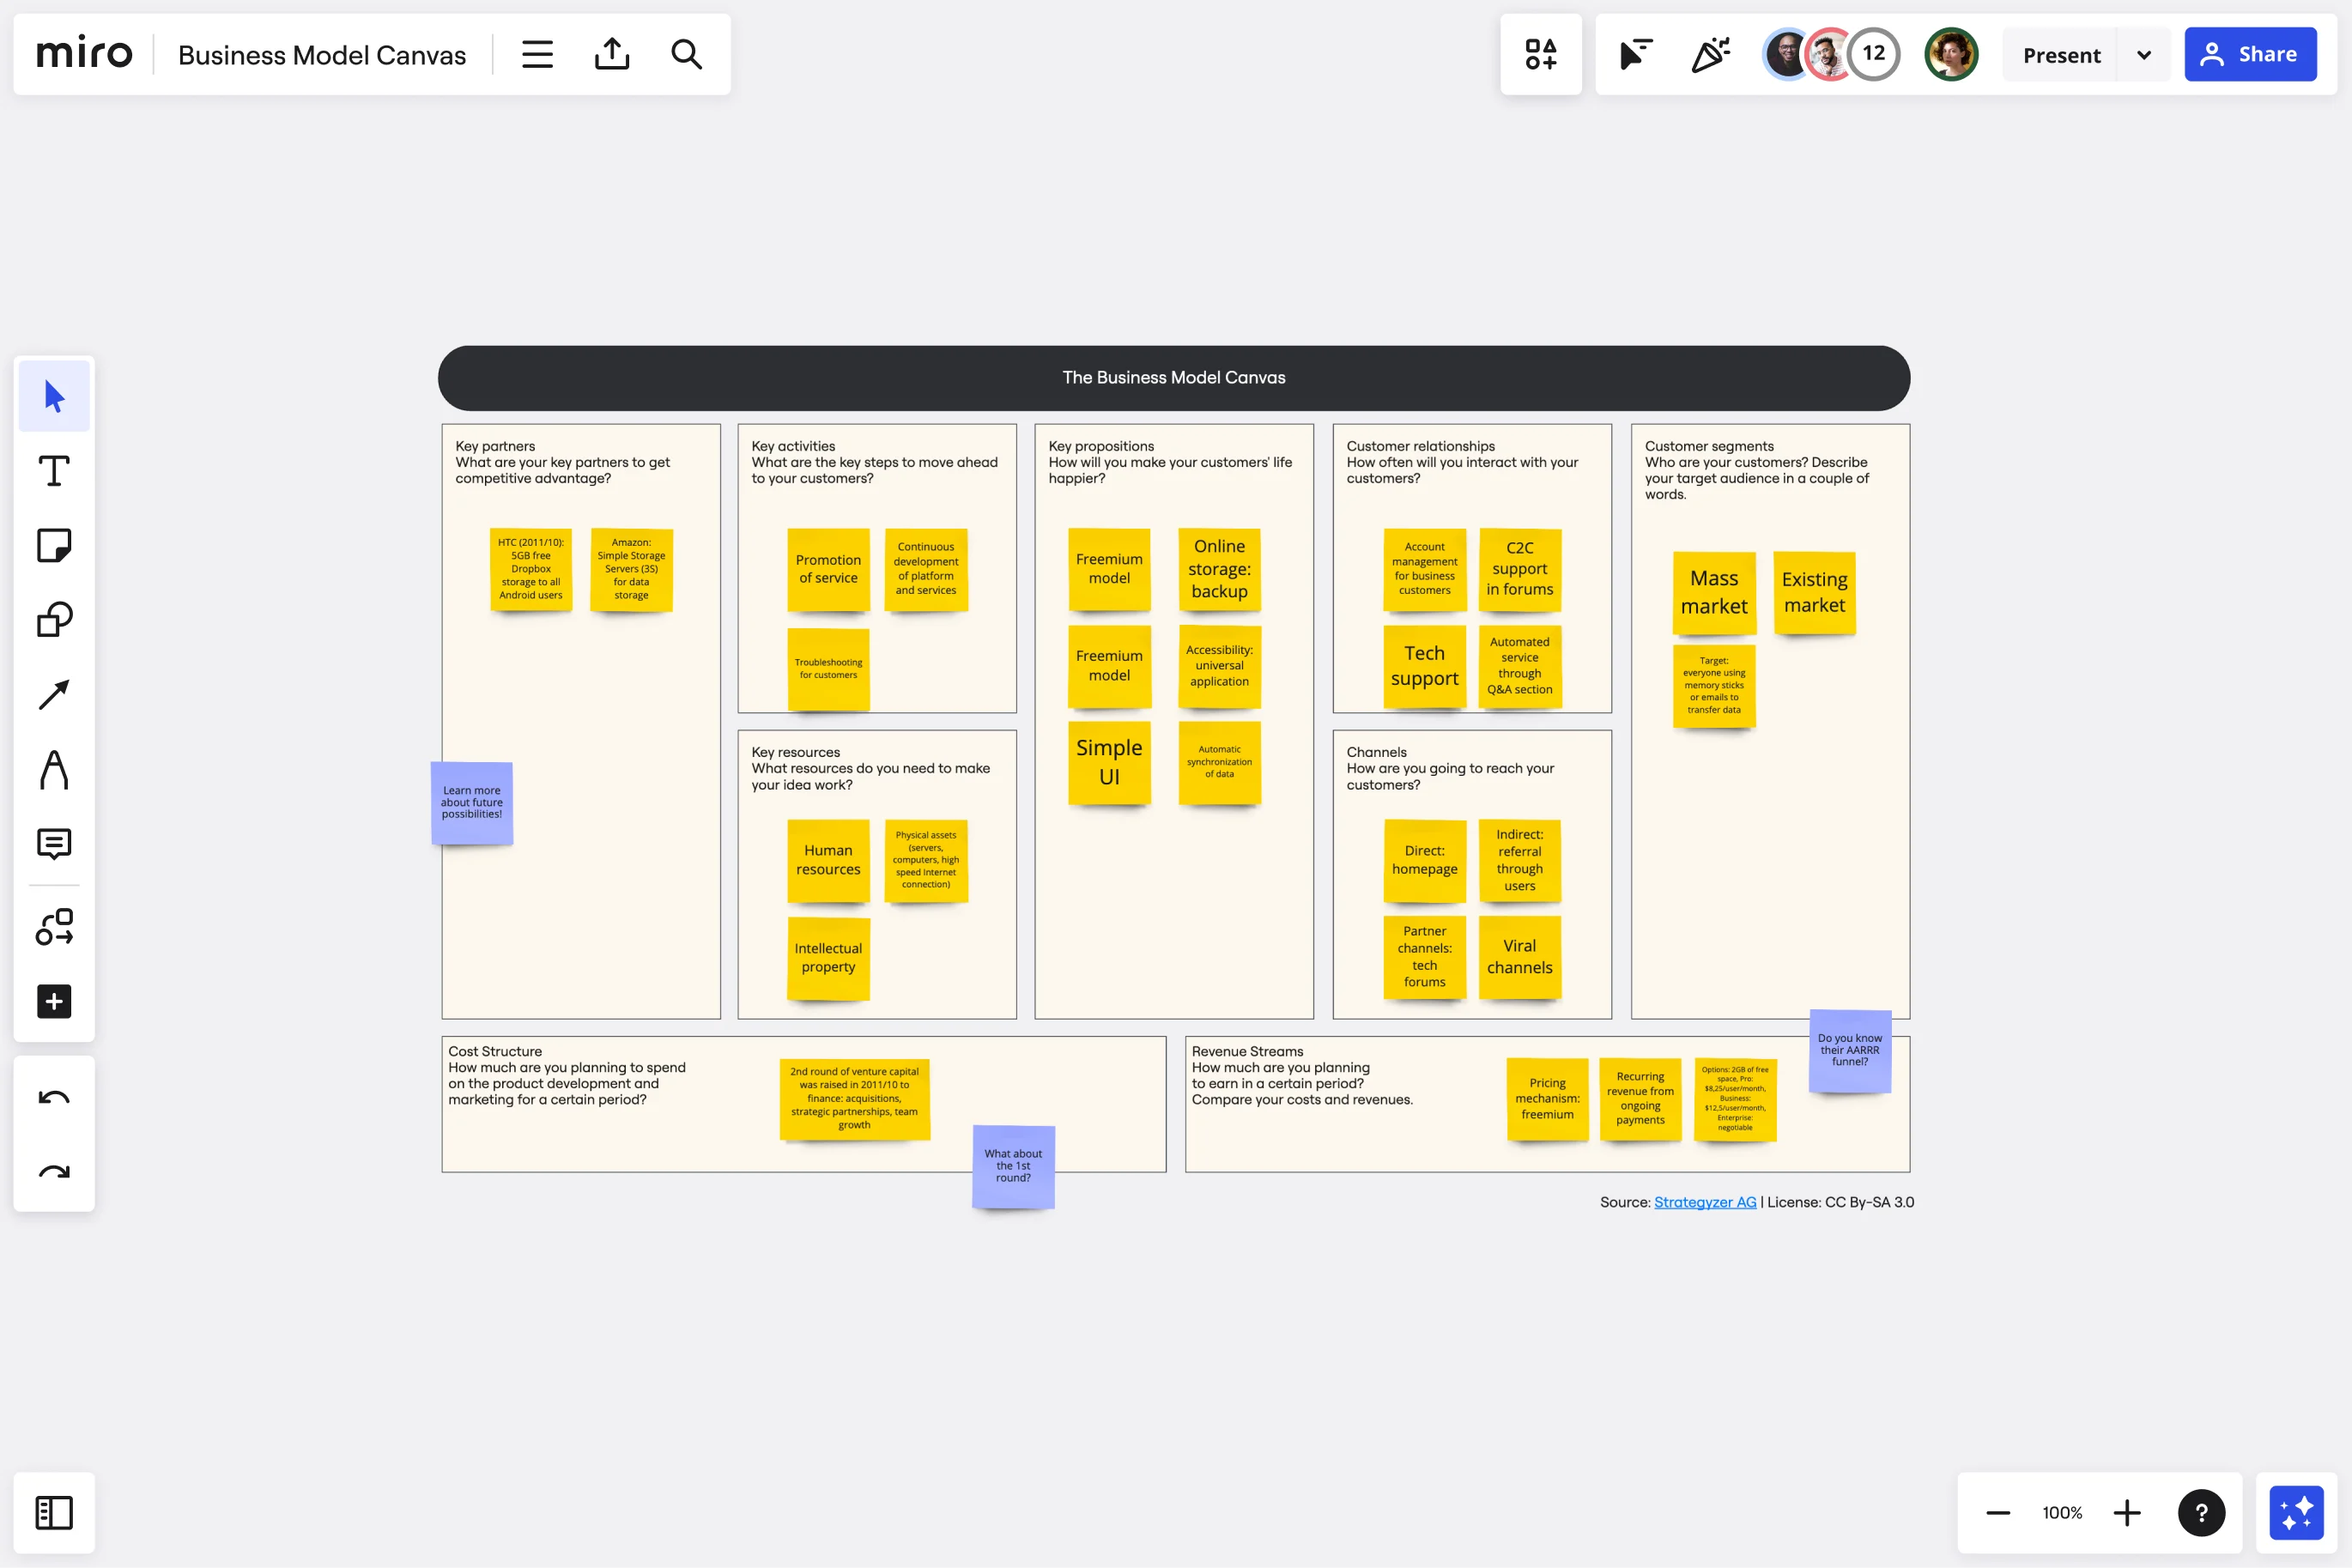  Business Model Canvas Template in Miro